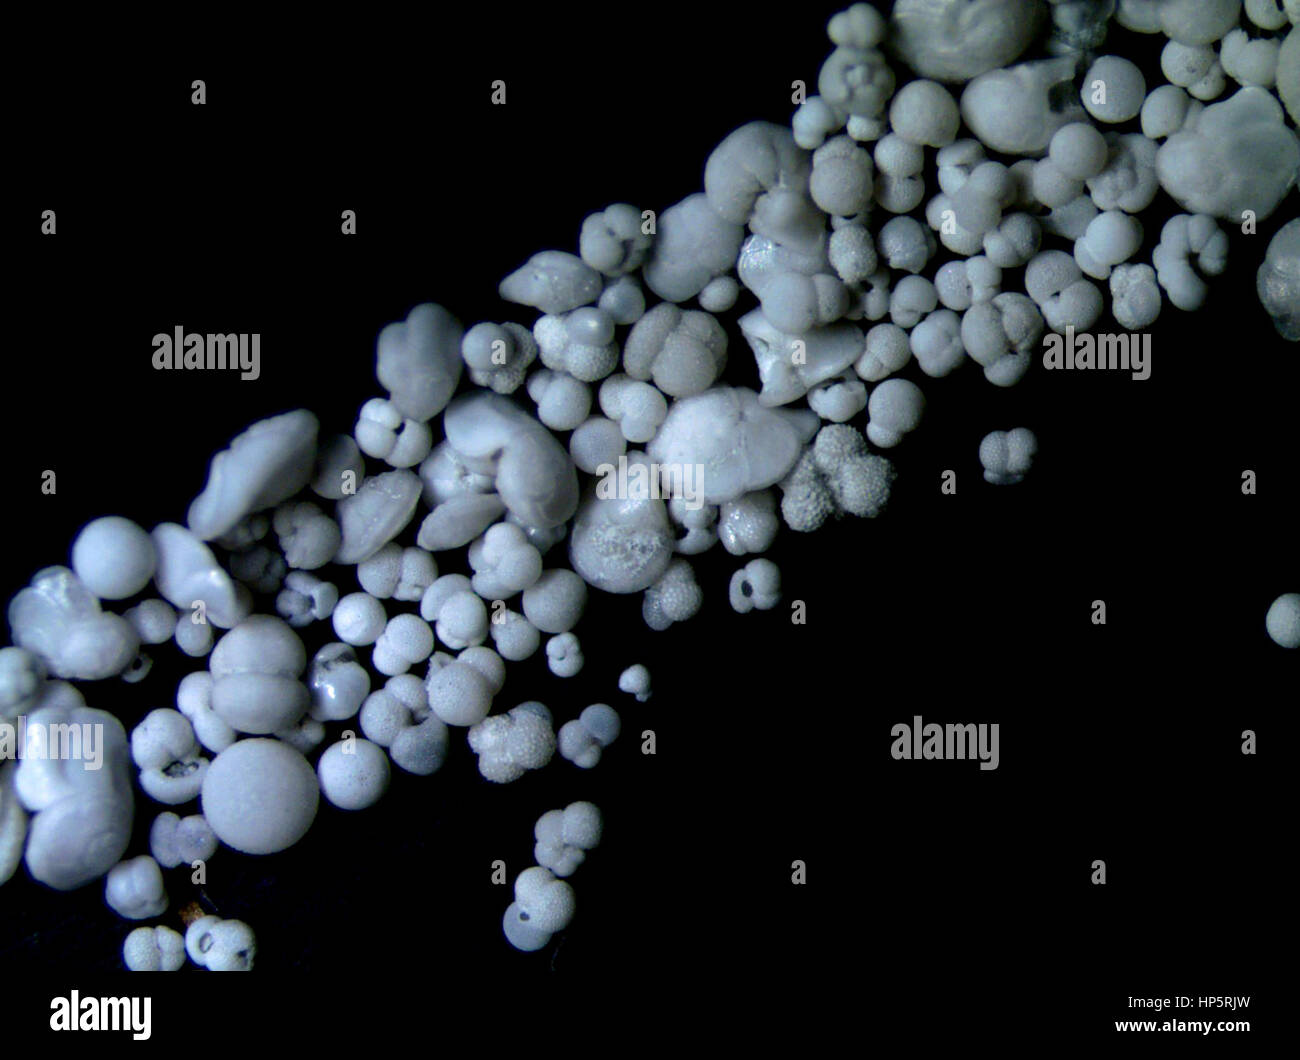 Aboard Joides Resolution. 17th Feb, 2017. Foraminifera samples drilled from the seafloor of the South China Sea are seen under the microscope on the U.S. drilling ship JOIDES Resolution, Feb. 17, 2017. Dozens of scientists from different countries are on an expedition to the South China Sea, to explore the formation of the sea as part of the International Ocean Discovery Program (IODP). Credit: Zhang Jiansong/Xinhua/Alamy Live News Stock Photo